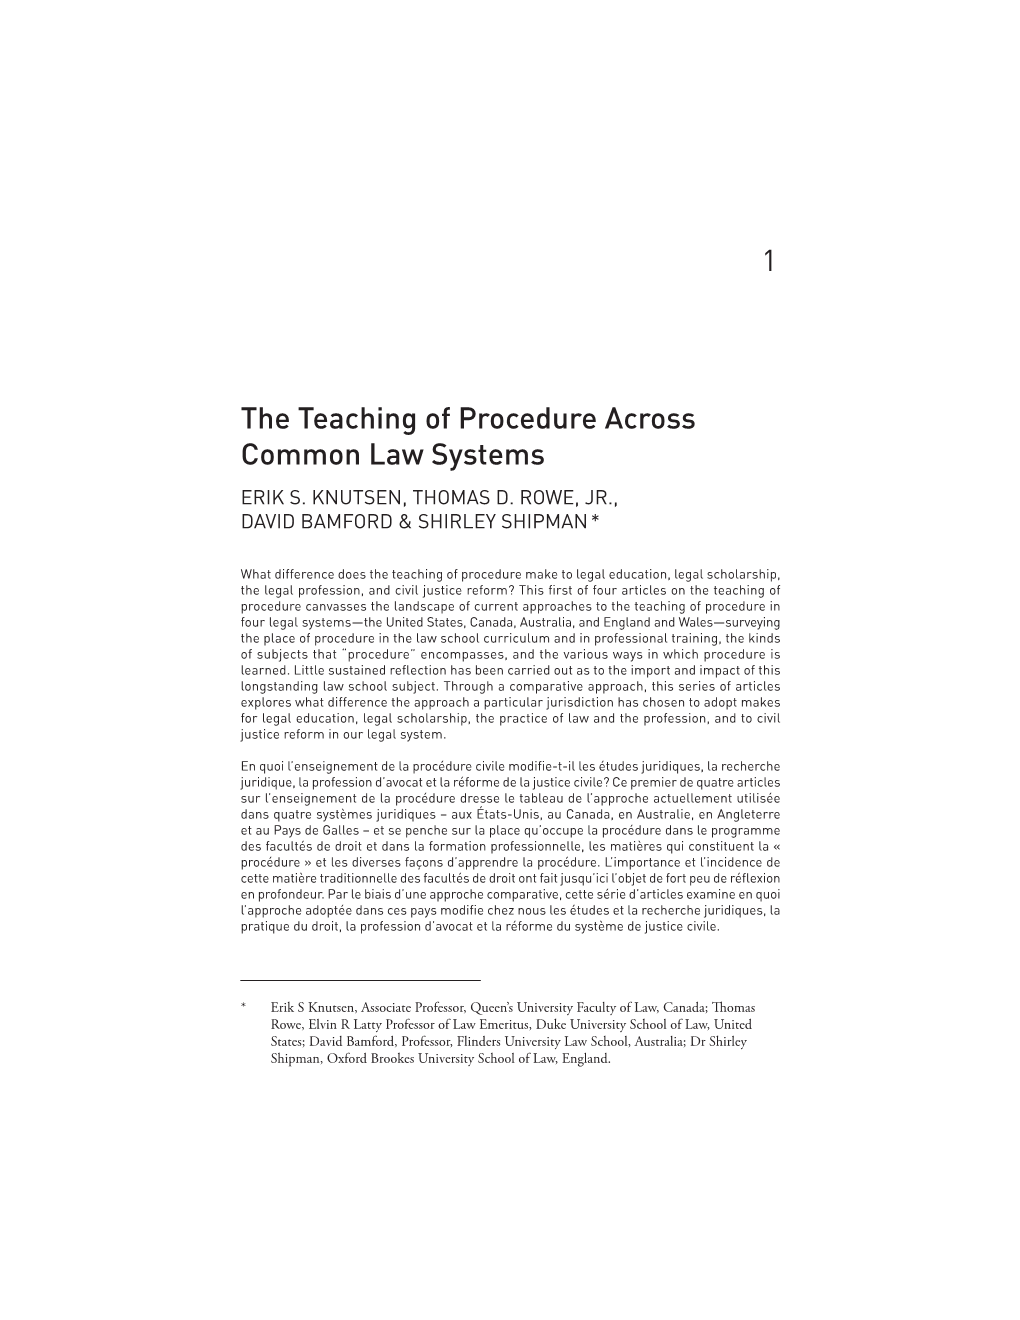 1 the Teaching of Procedure Across Common Law Systems